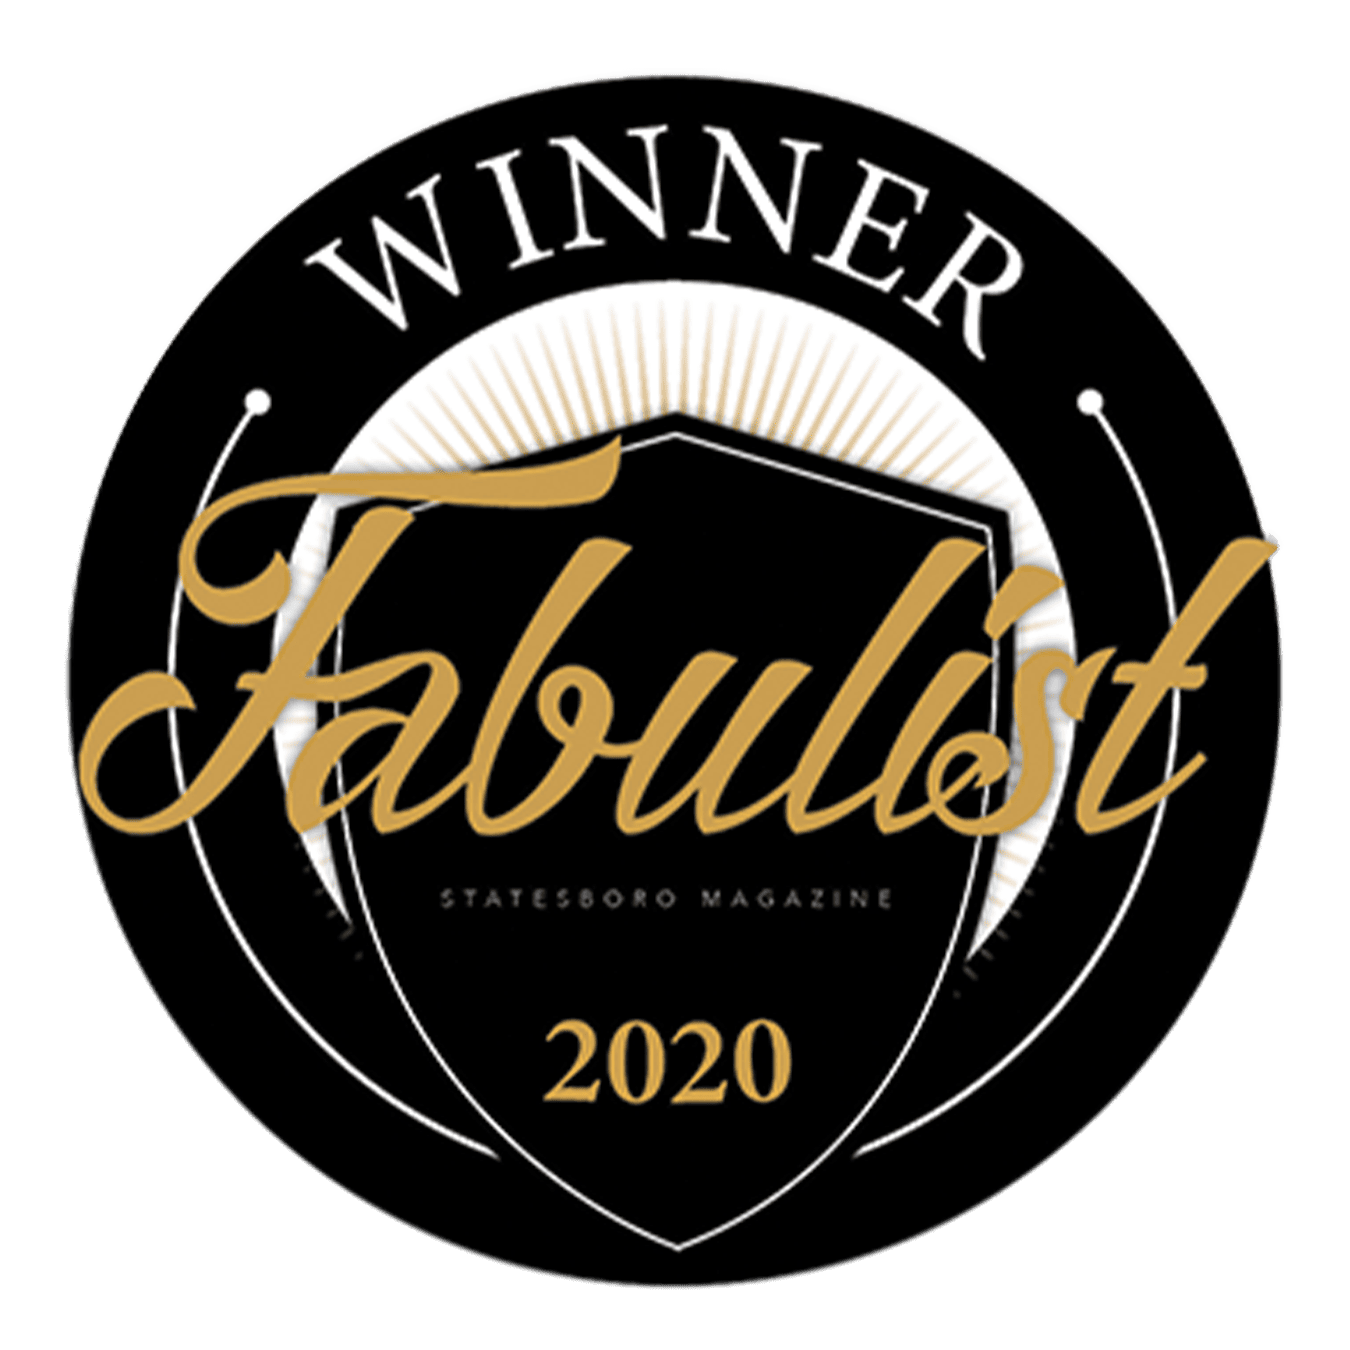 Gold writing for the 2020 Fabulist Winner is on a black shield and circle emblem.